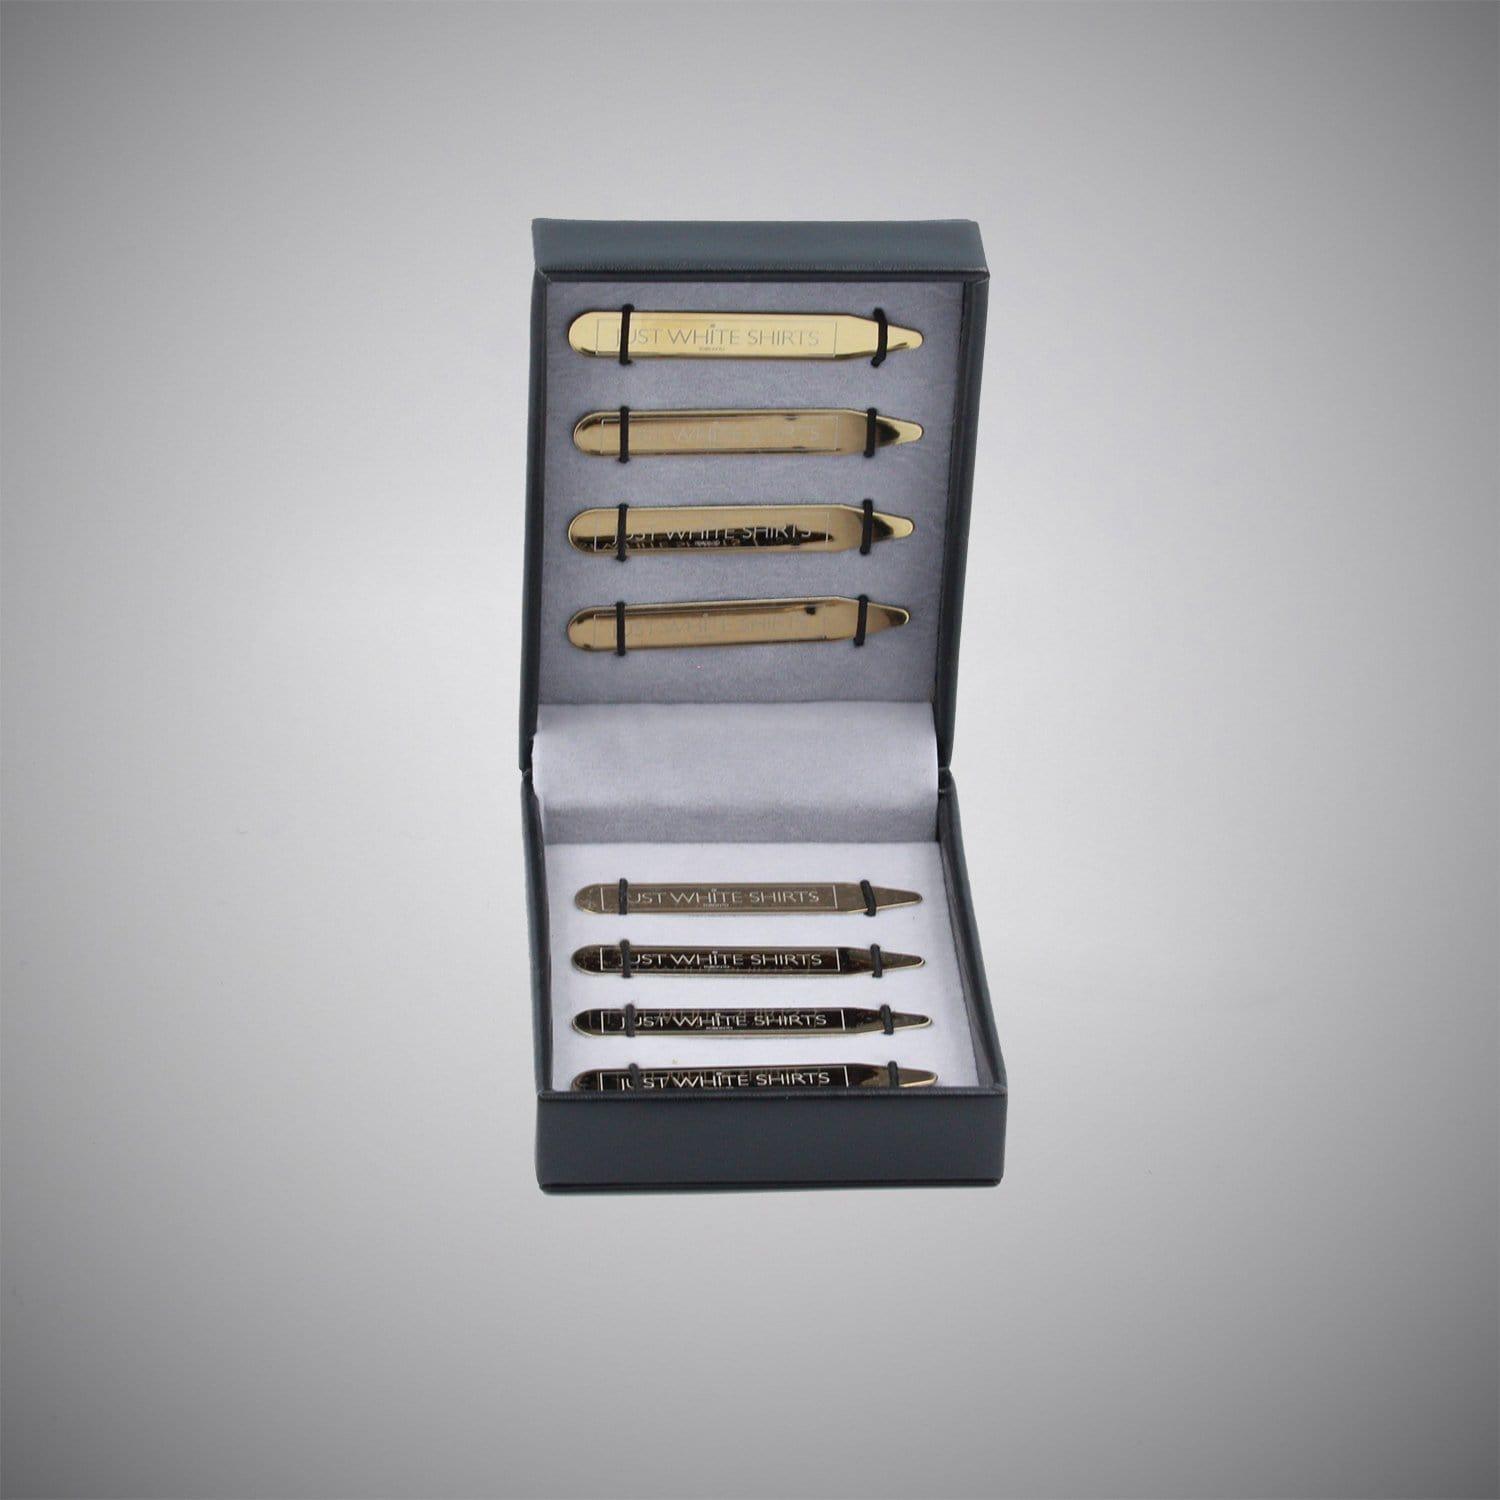 Gold Chrome Finish Stainless Steel 8 Piece Collar Stay Box Set - Just White Shirts